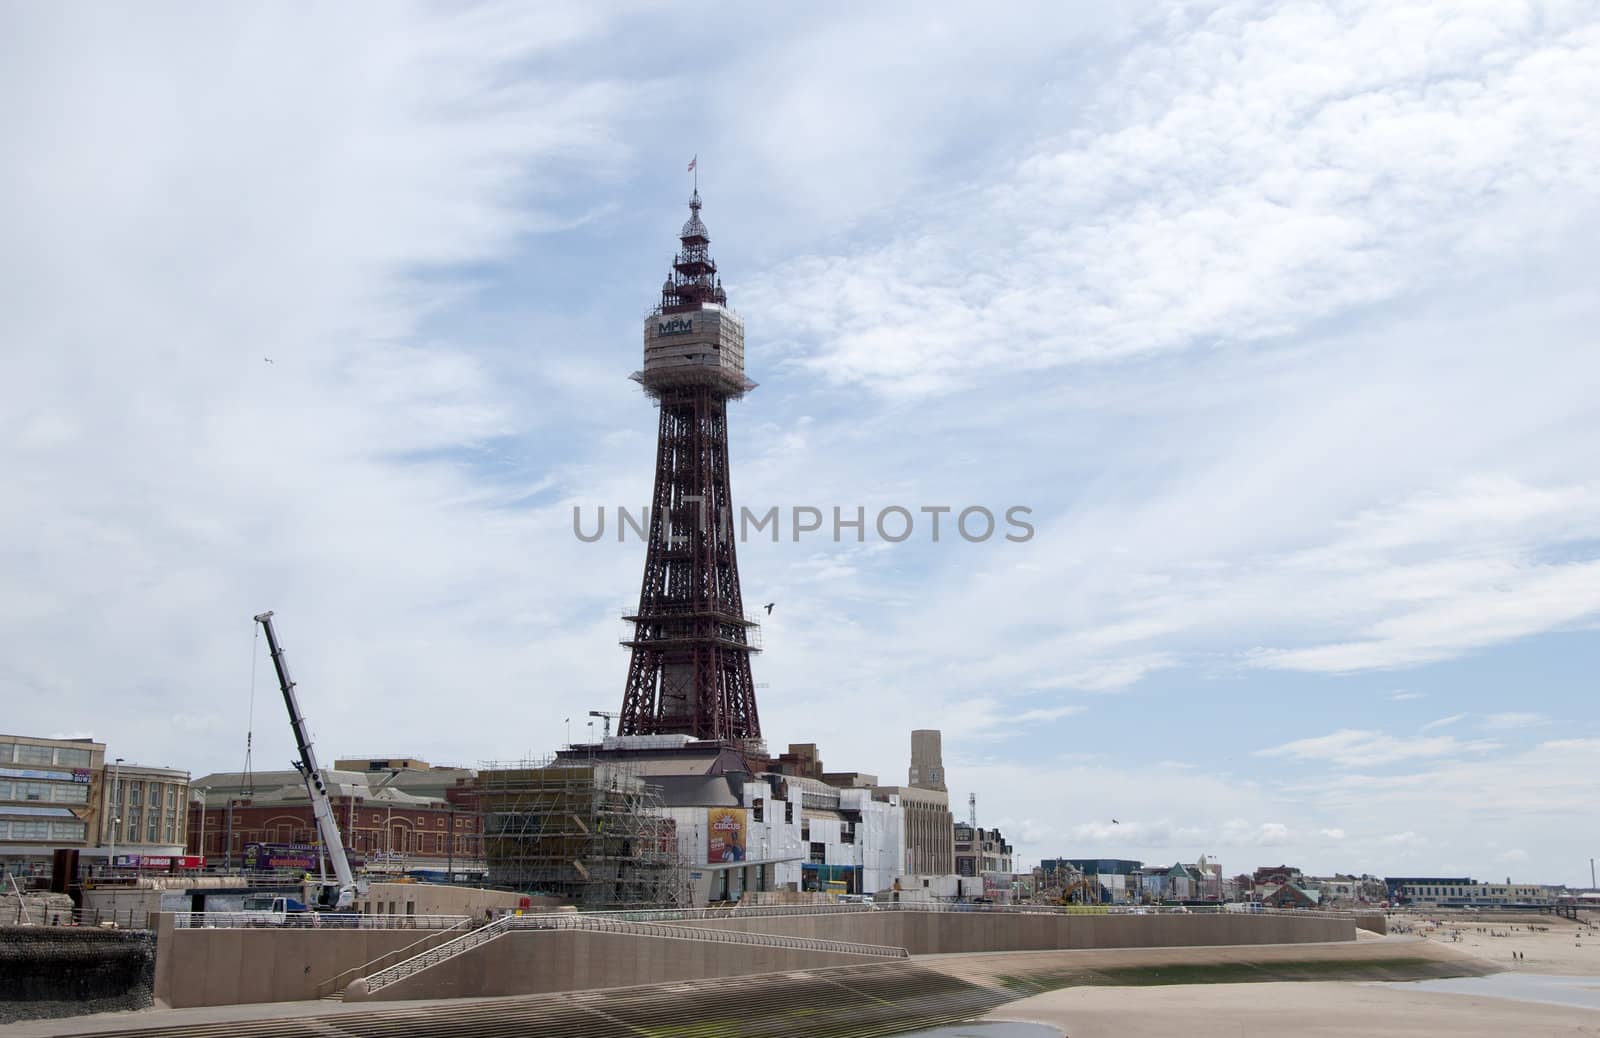 Blackpool Tower and Crane by d40xboy